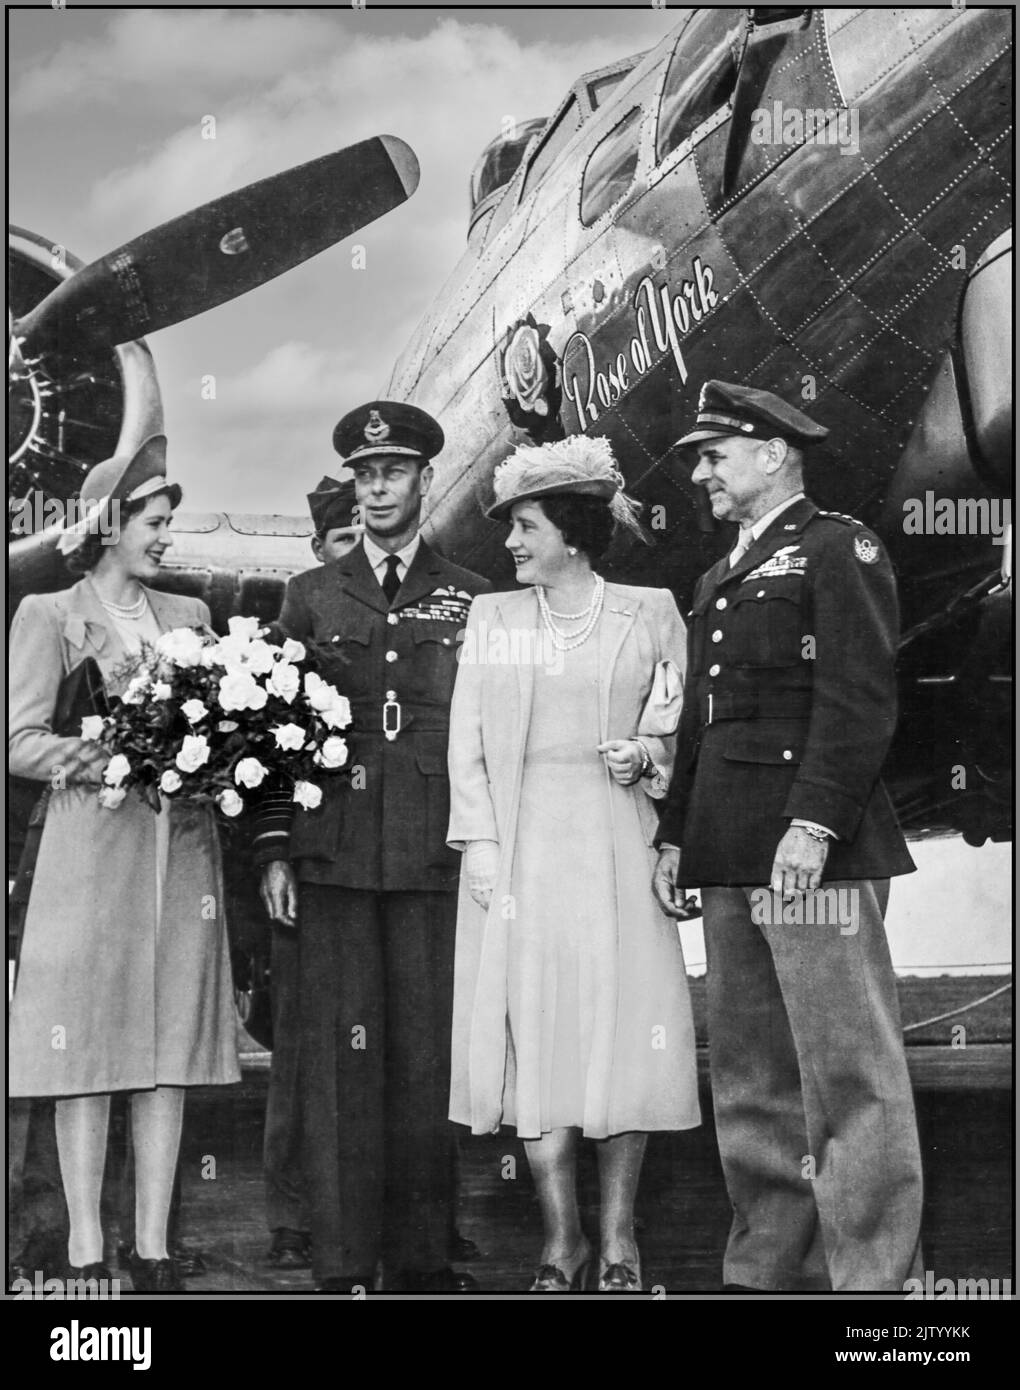 WW2 HRH The Princess Elizabeth with His Majesty King George VI, Marshal of the Royal Air Force along with Her Majesty Queen Angela Marguerite Bowes-Lyon Elizabeth beside Lieutenant General James H. Doolittle, US Army Air Forces, commanding Eighth Air Force, On Saturday, 3 February 1945, the Eighth Air Force, under the command of Lieutenant General James Harold (“Jimmy”) Doolittle, executed Mission No. 817. with 1,003 B-17 Flying Fortresses, The B-17s’ primary target was  Berlin's railroad in Nazi Germany Stock Photo